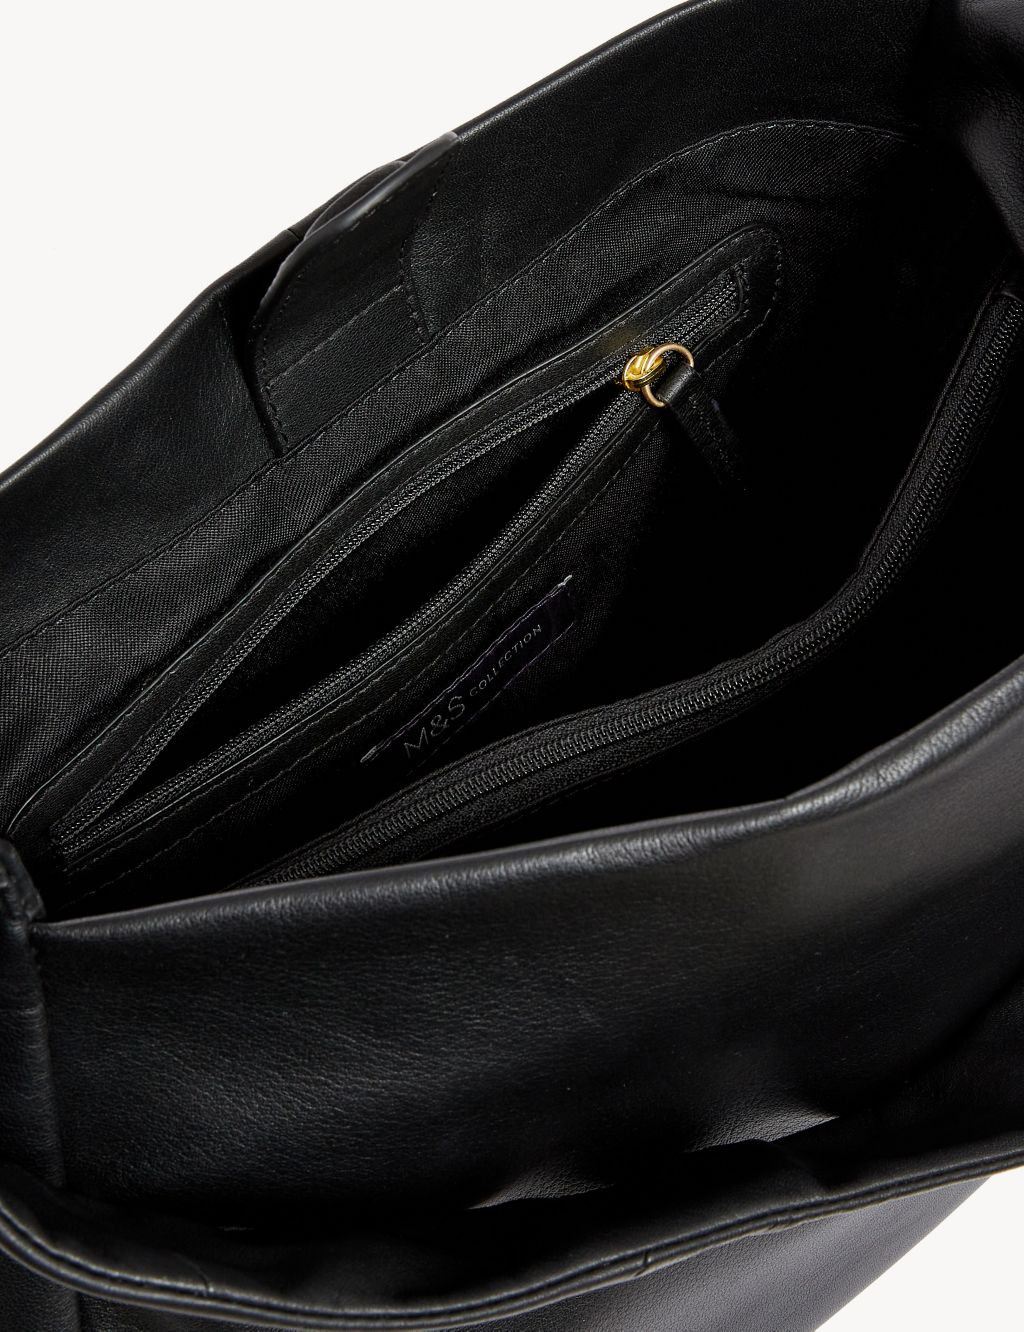 Grab this stylish black leather purse for the Holiday season!